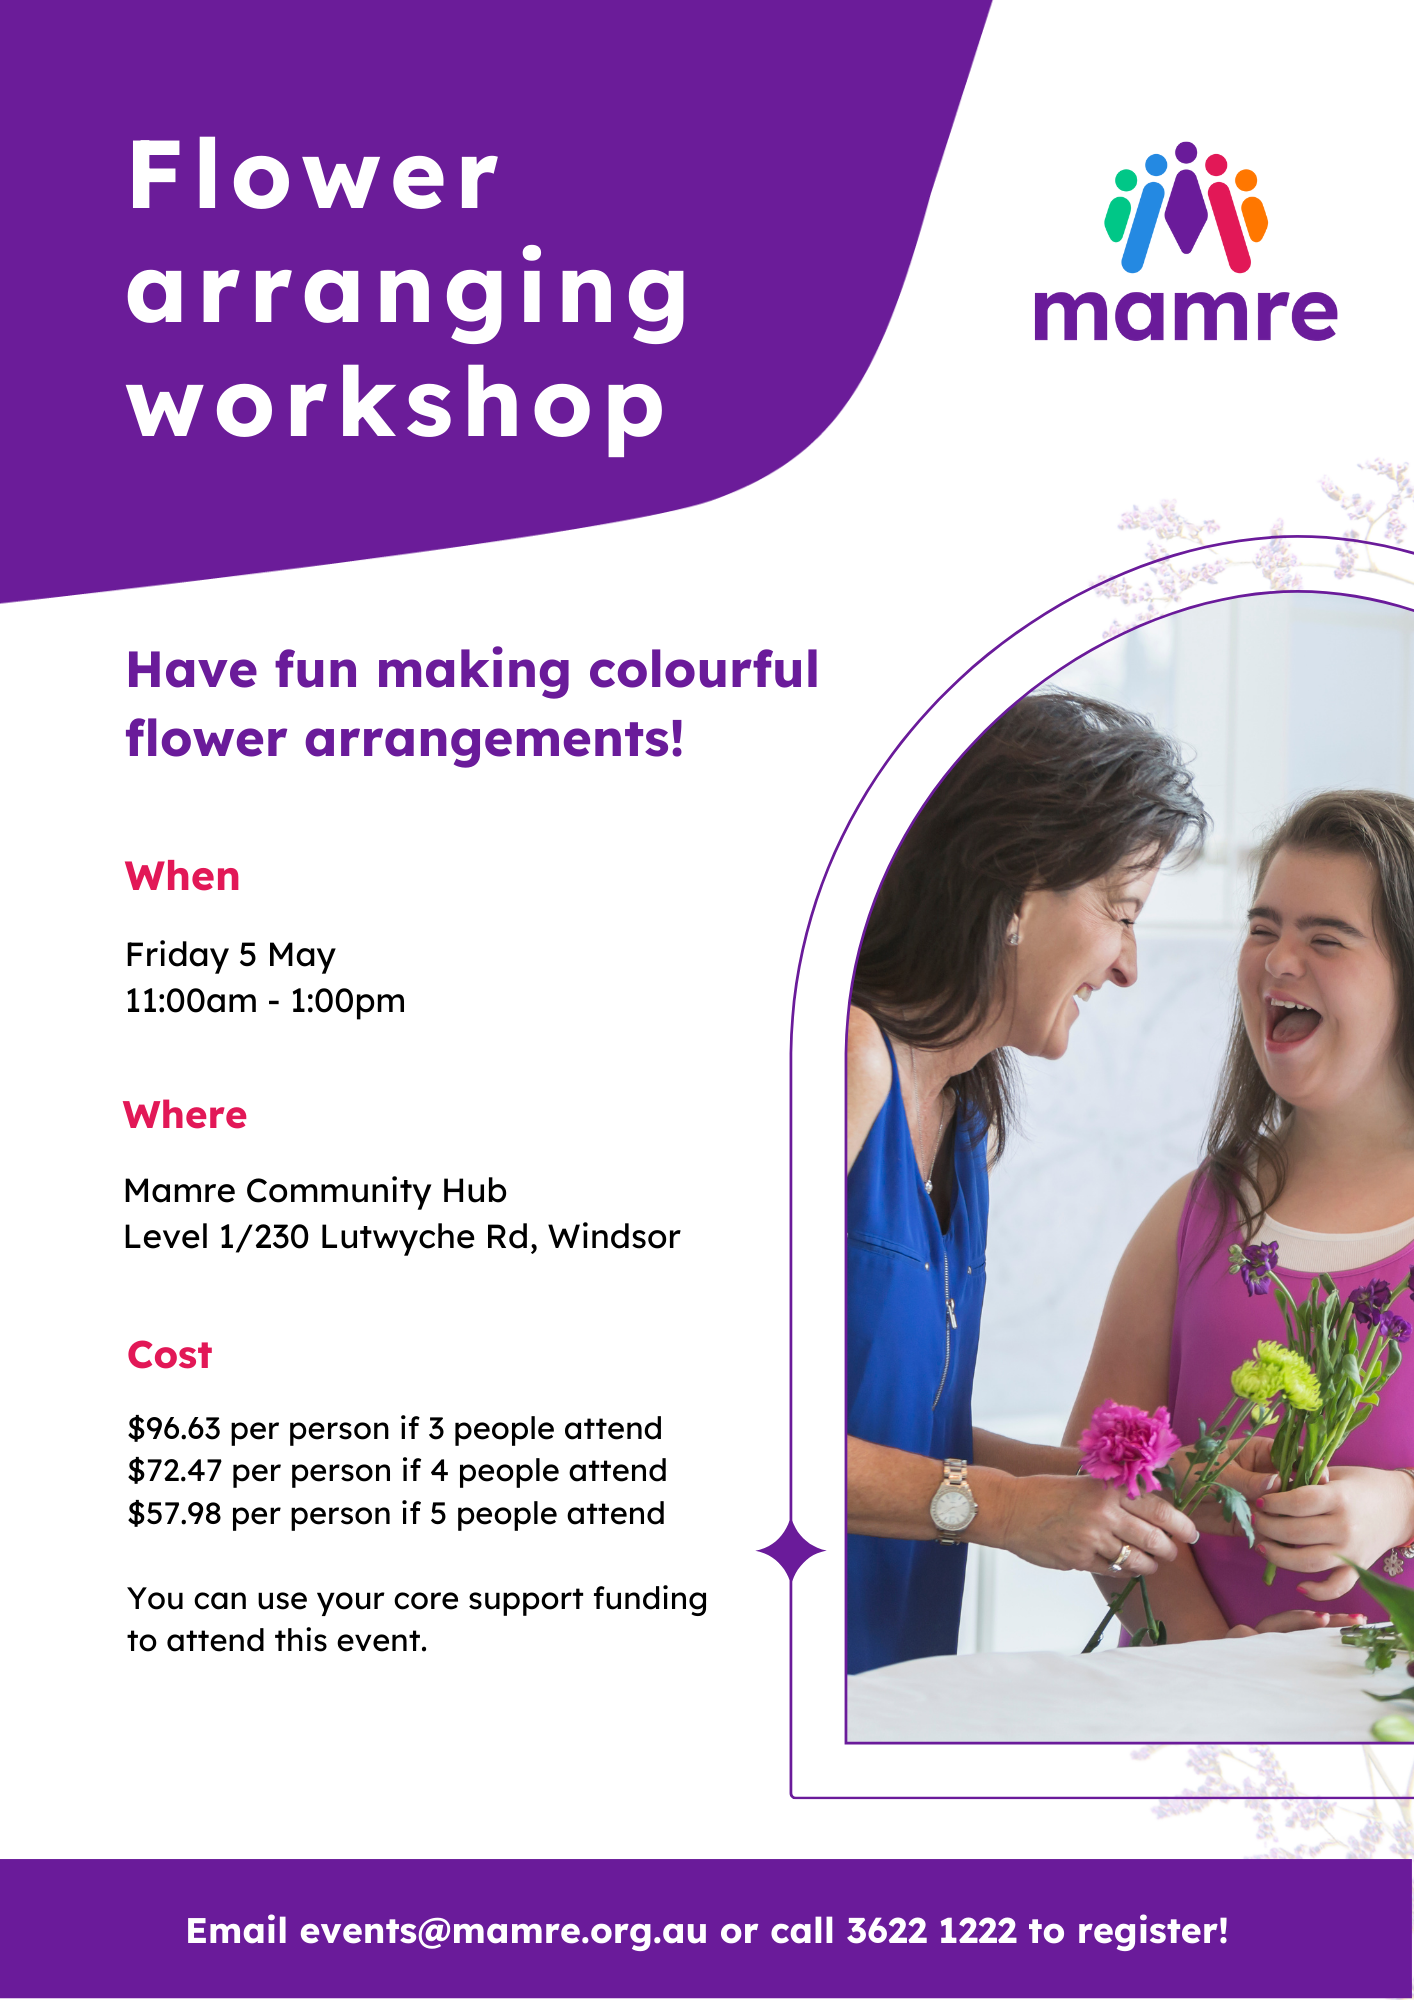 Flower arranging workshop may 2023. Two women smile while holding flowers